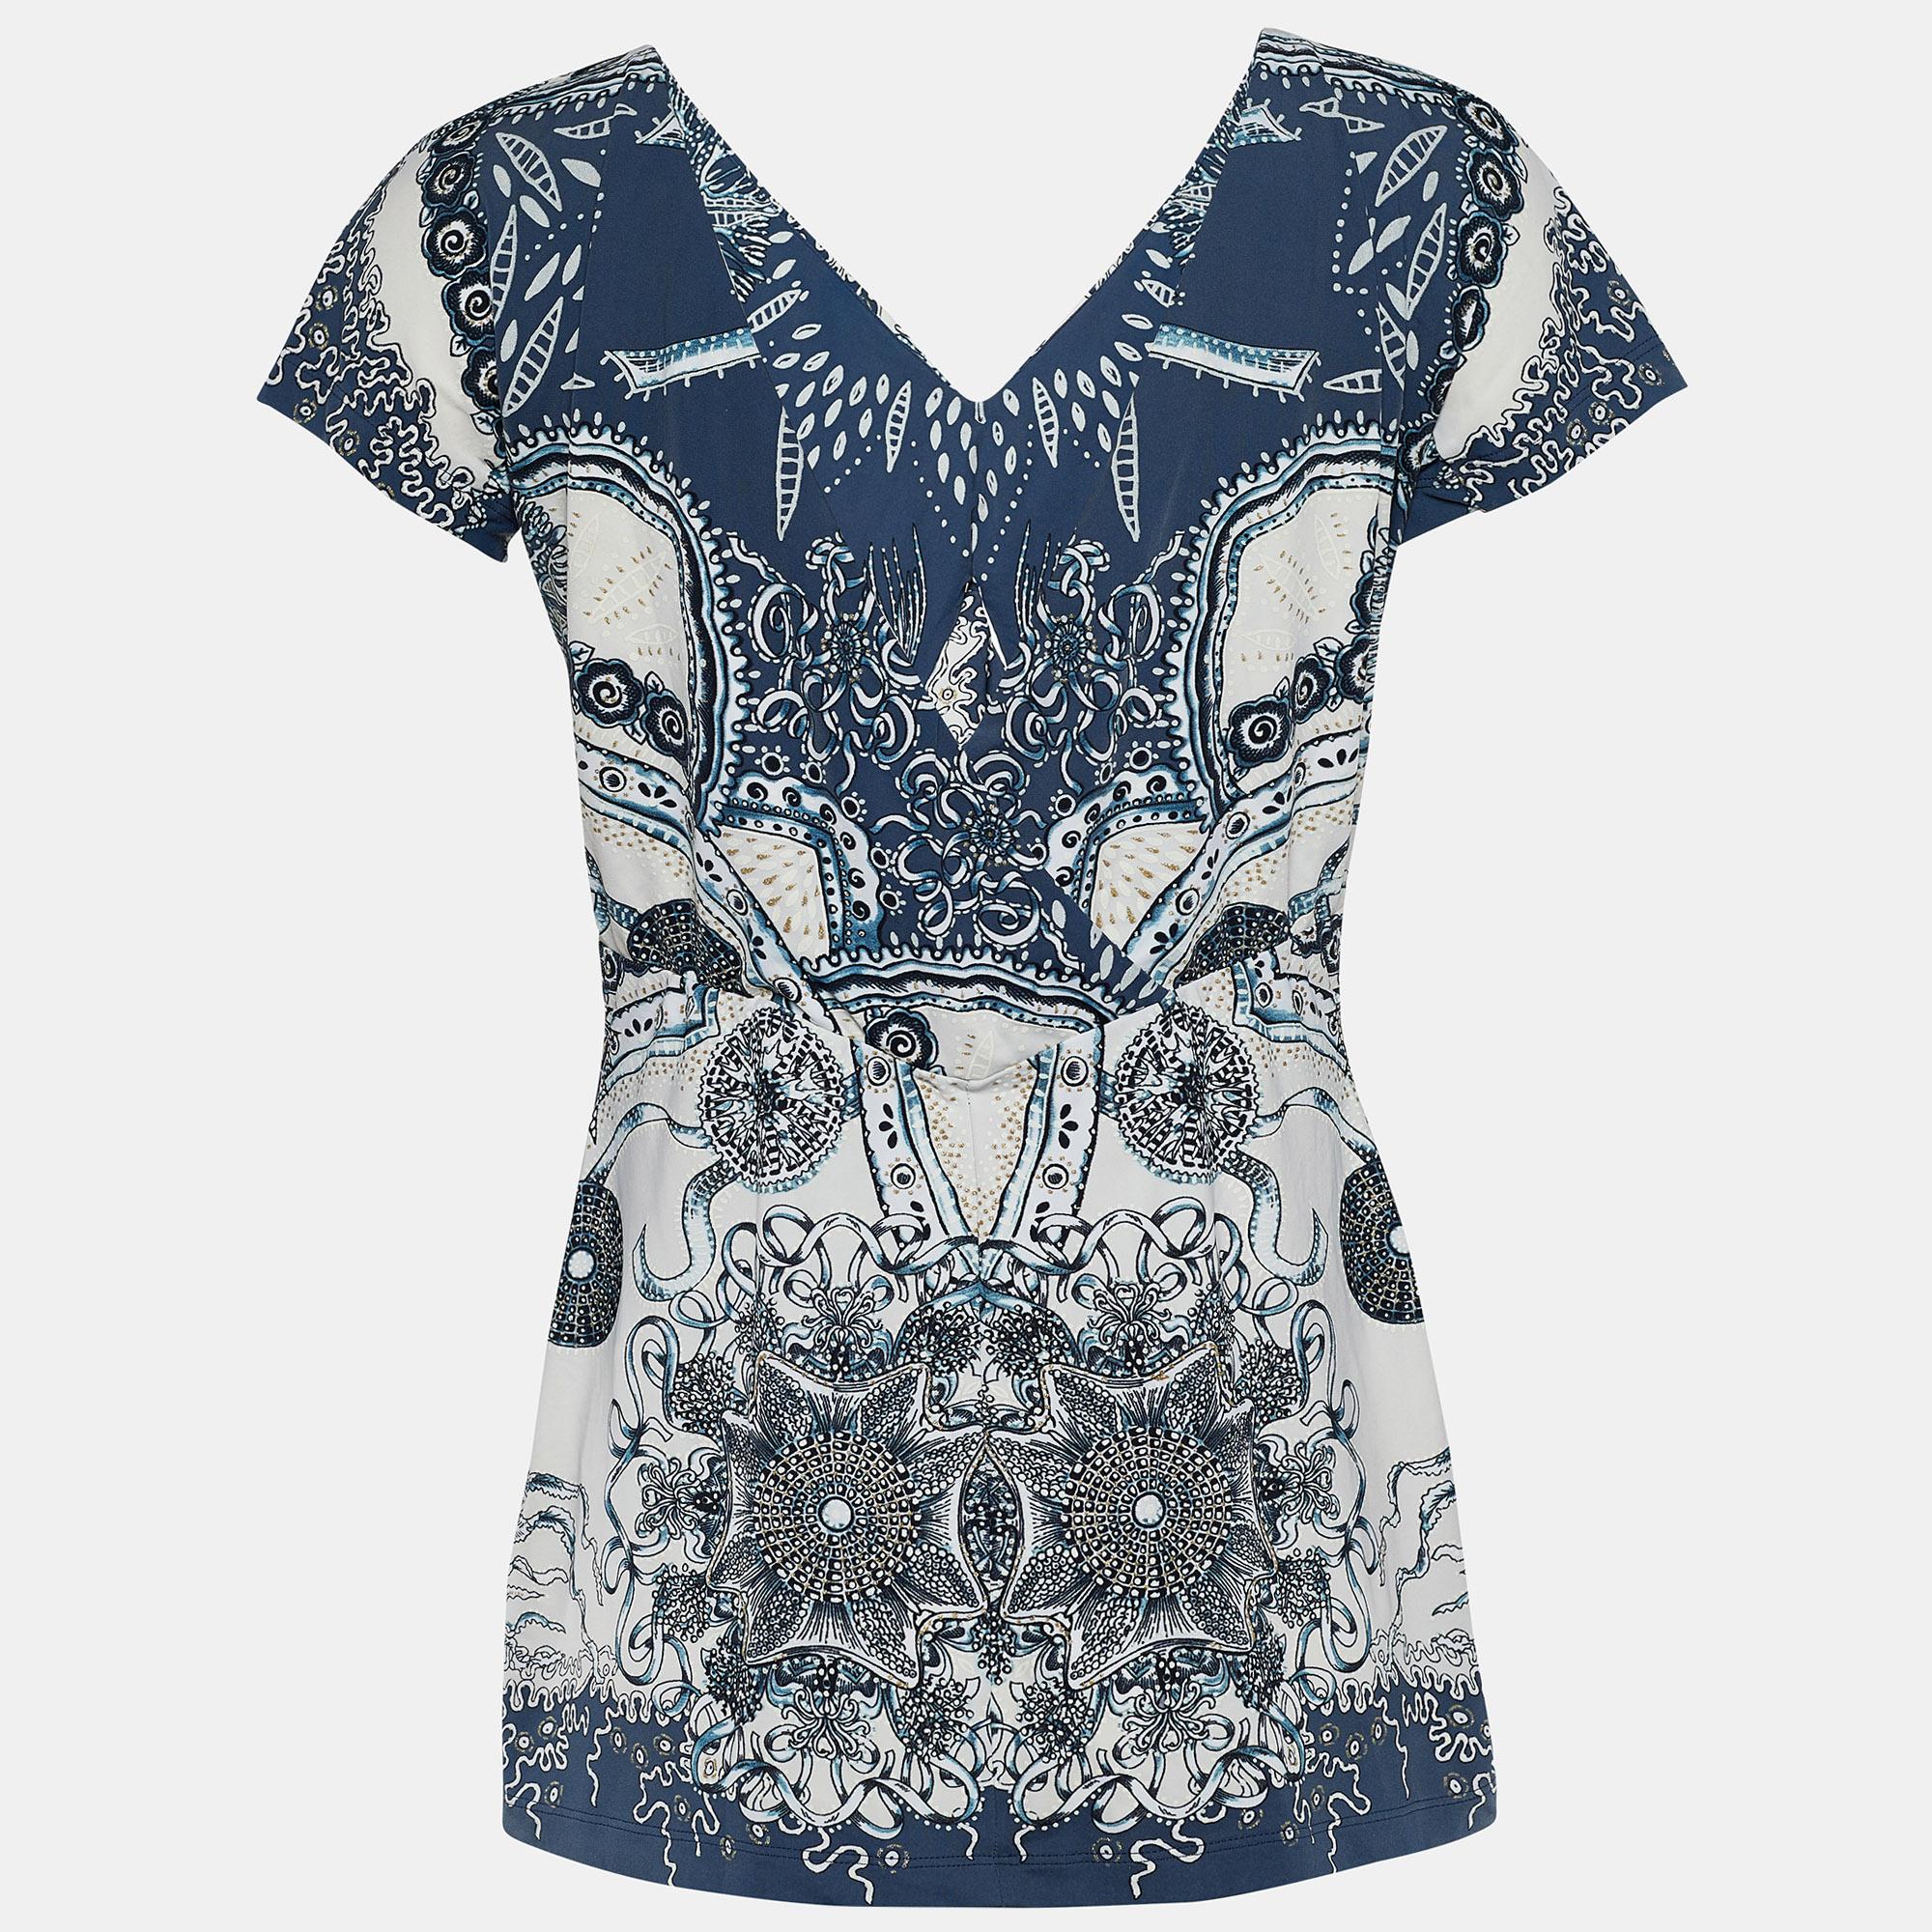 Upgrade your style with this lovely top from Roberto Cavalli. Featuring an artistic print, it has short sleeves and a V neck. Team it with a skirt or trousers for lunch outings.

Includes: Info Booklet, Price Tag